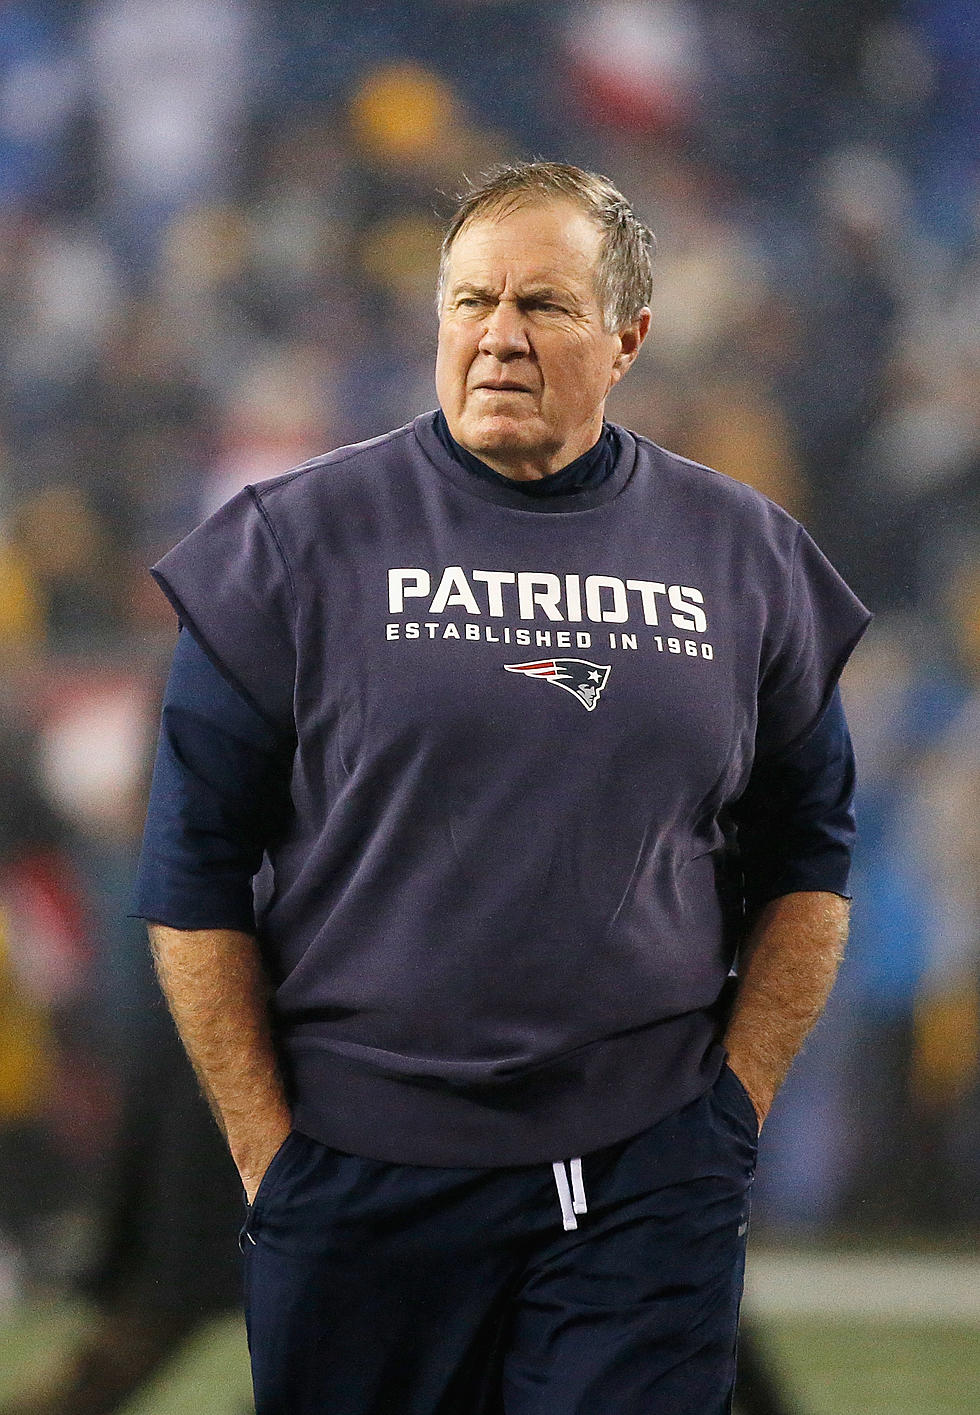 The “Belichick Sleeve” – Genius, or Fashion Faux Pas?